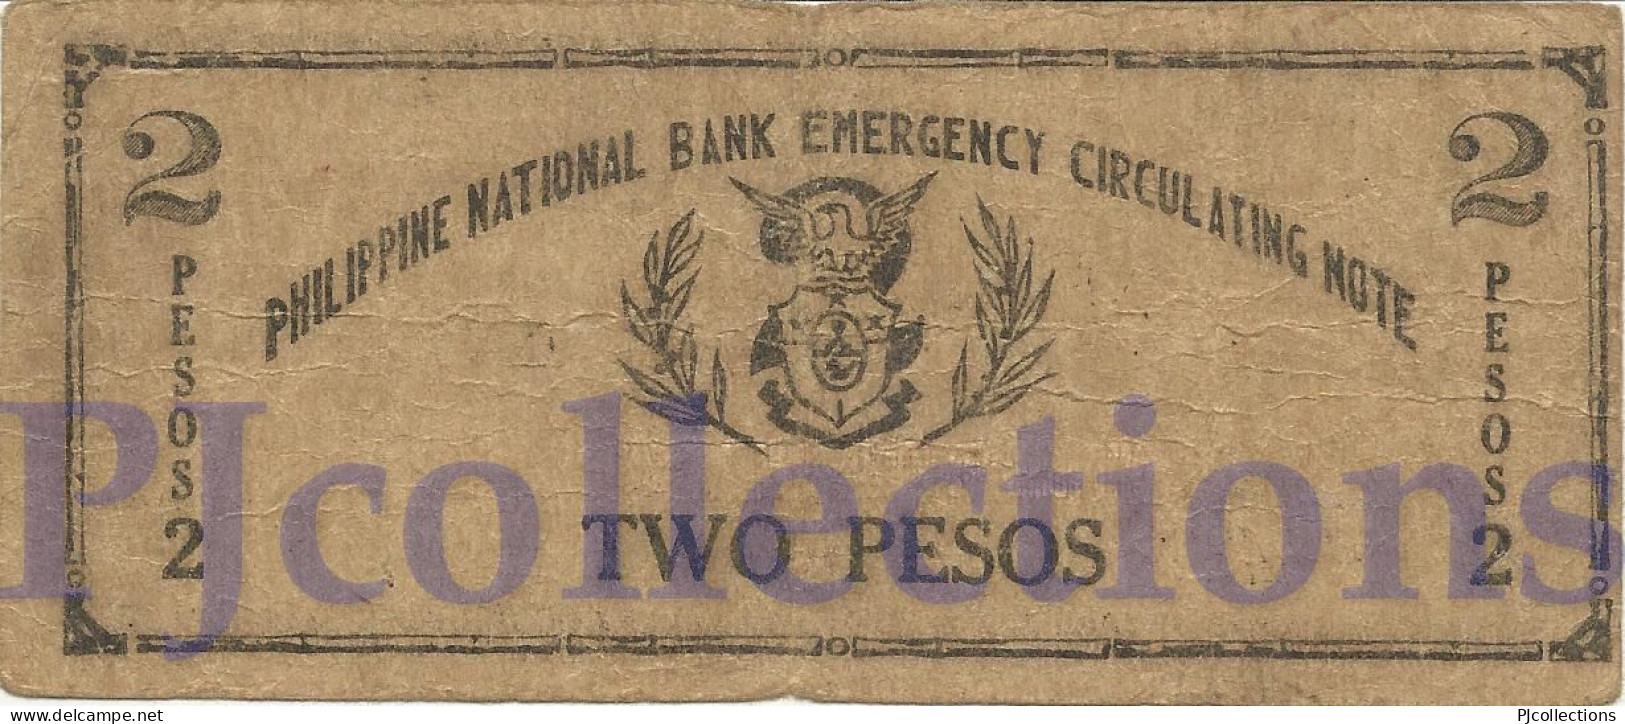 PHILIPPINES 2 PESOS 1942 PICK S577a FINE EMERGENCY NOTE - Philippinen